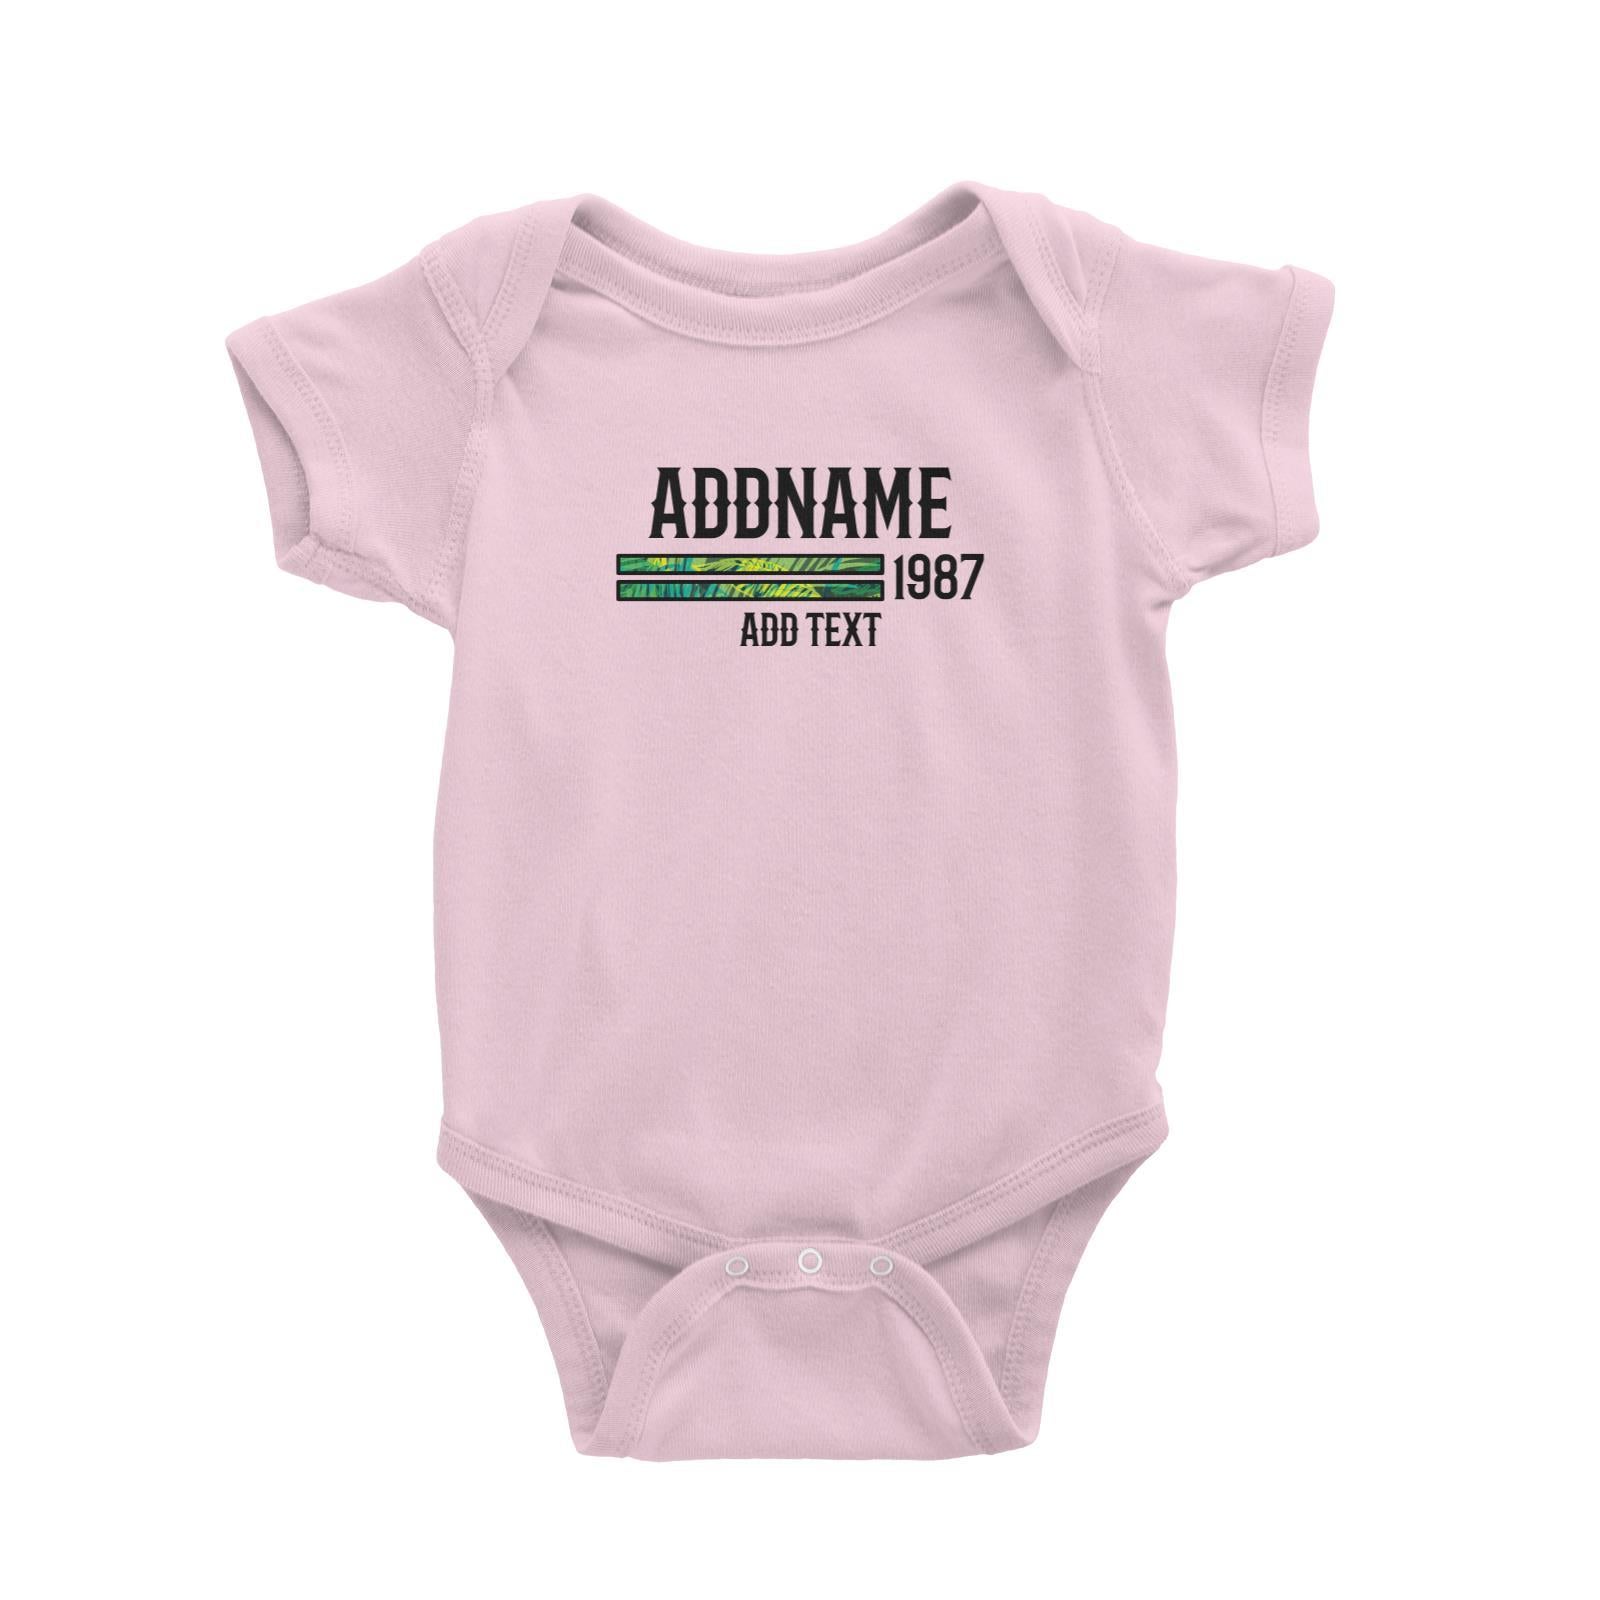 Palm Leaves Pattern Bars Personalizable with Name Number and Text Baby Romper